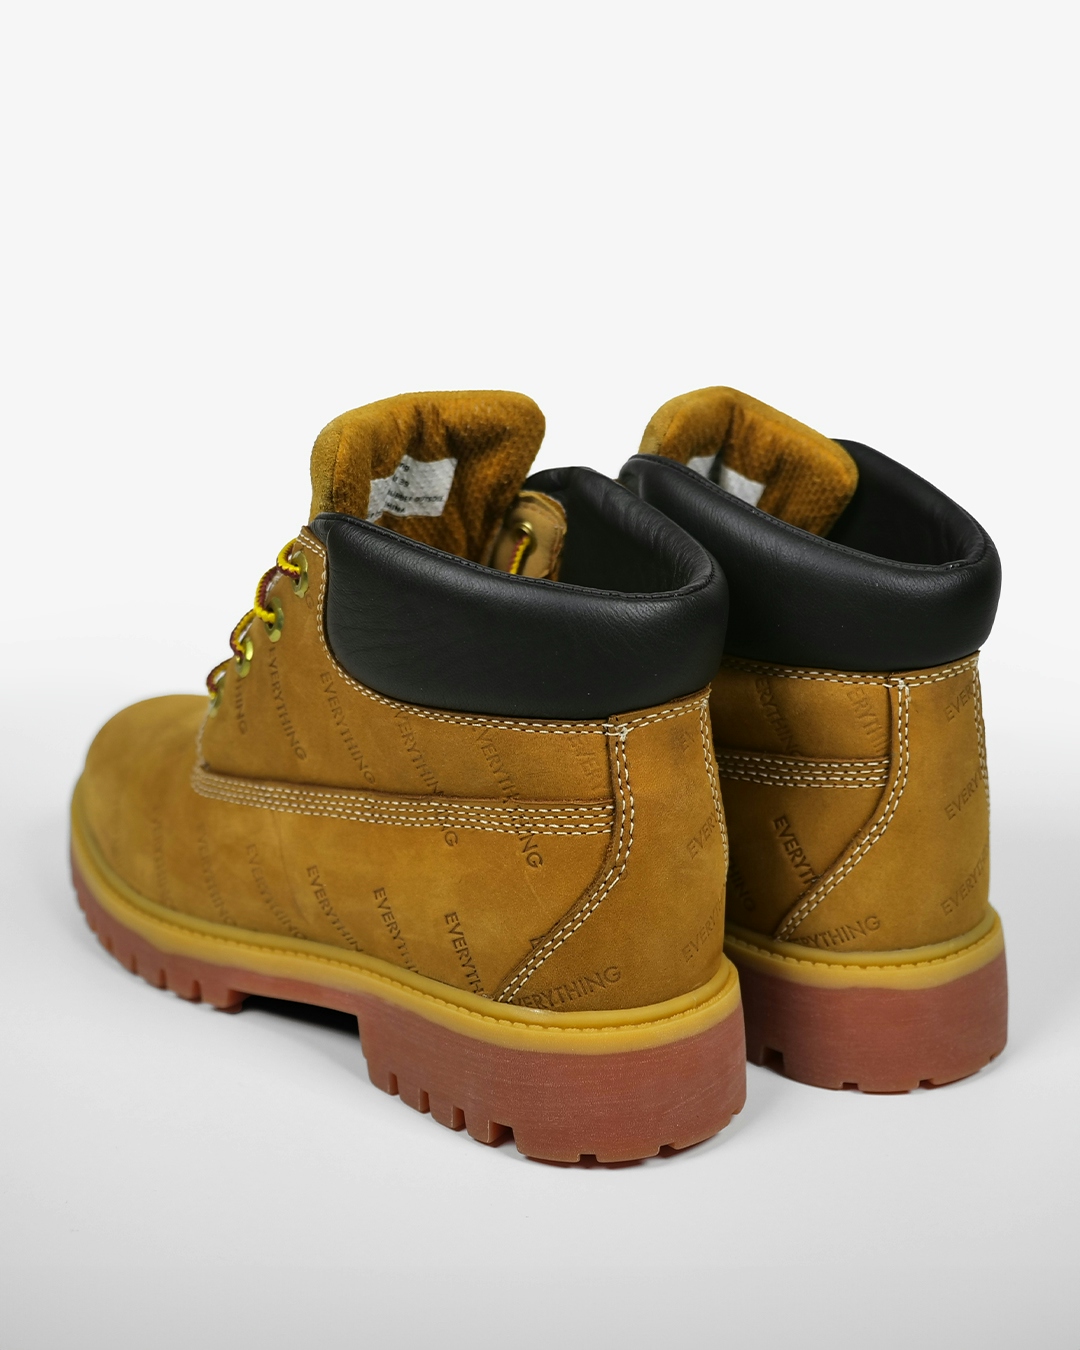 Industrial patterned boots - Yellow